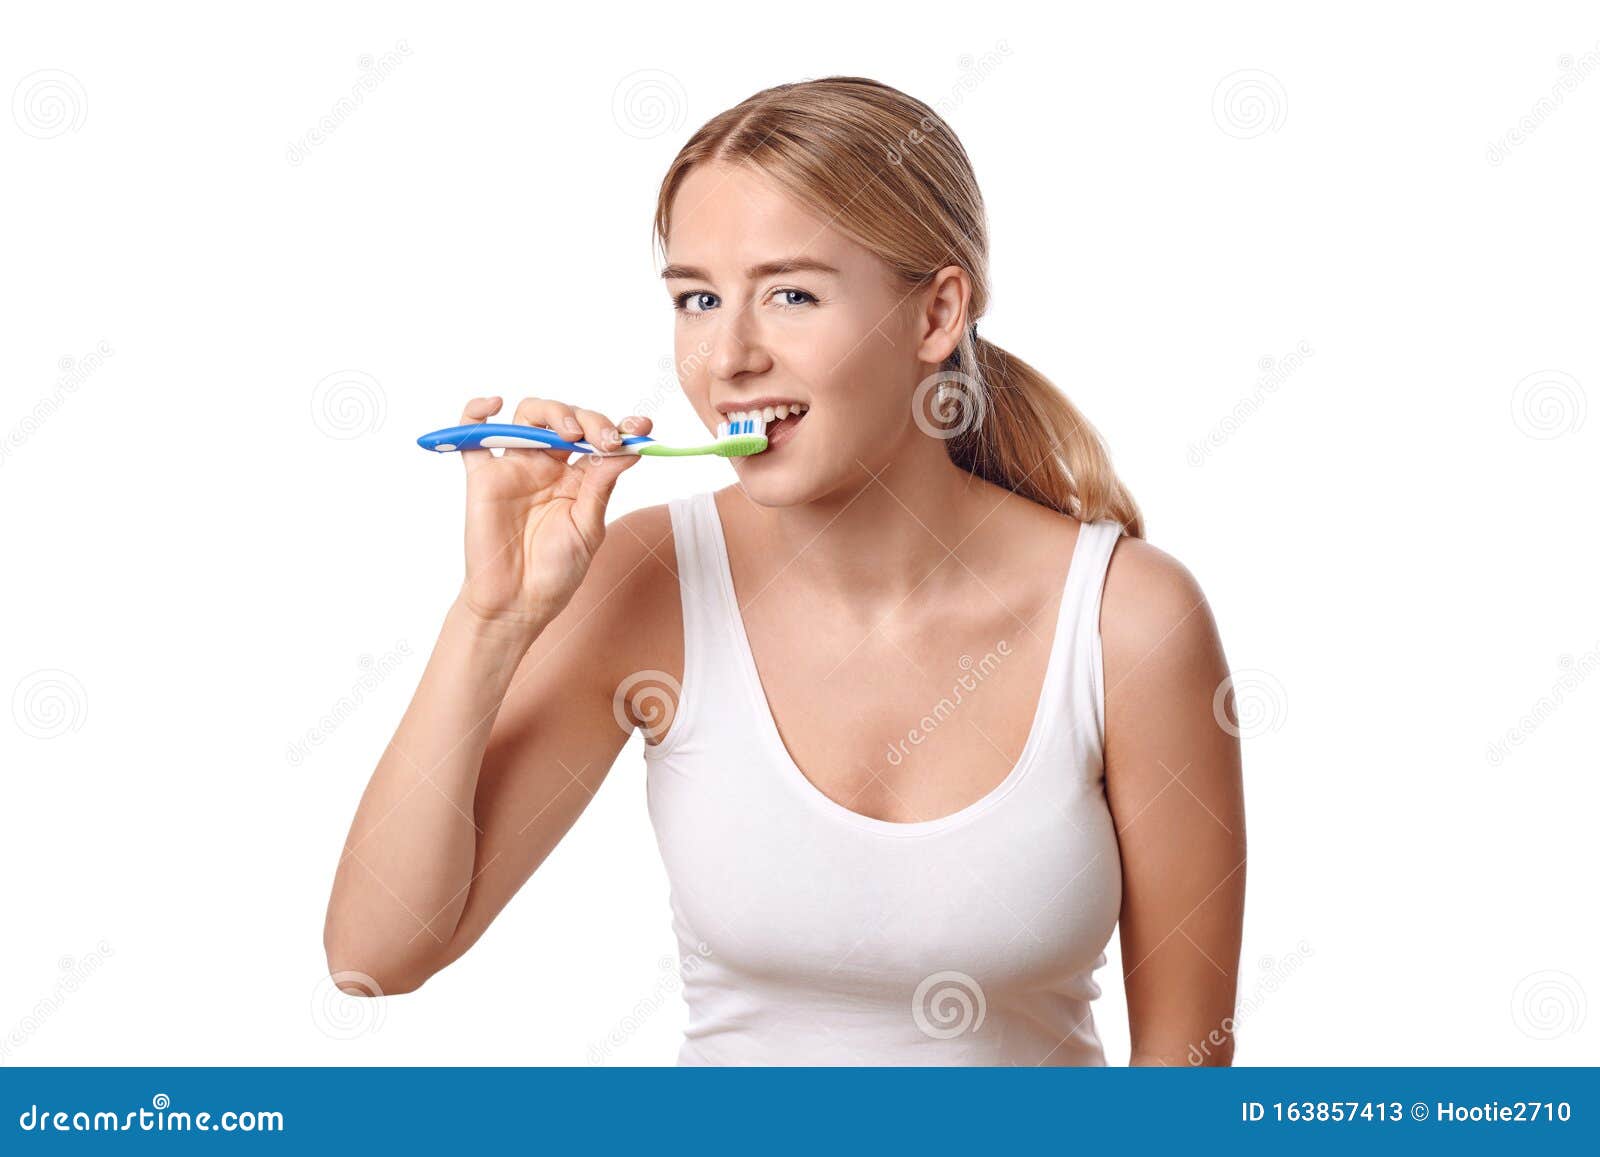 Attractive Woman Brushing Her Teeth Stock Image Image Of Camera